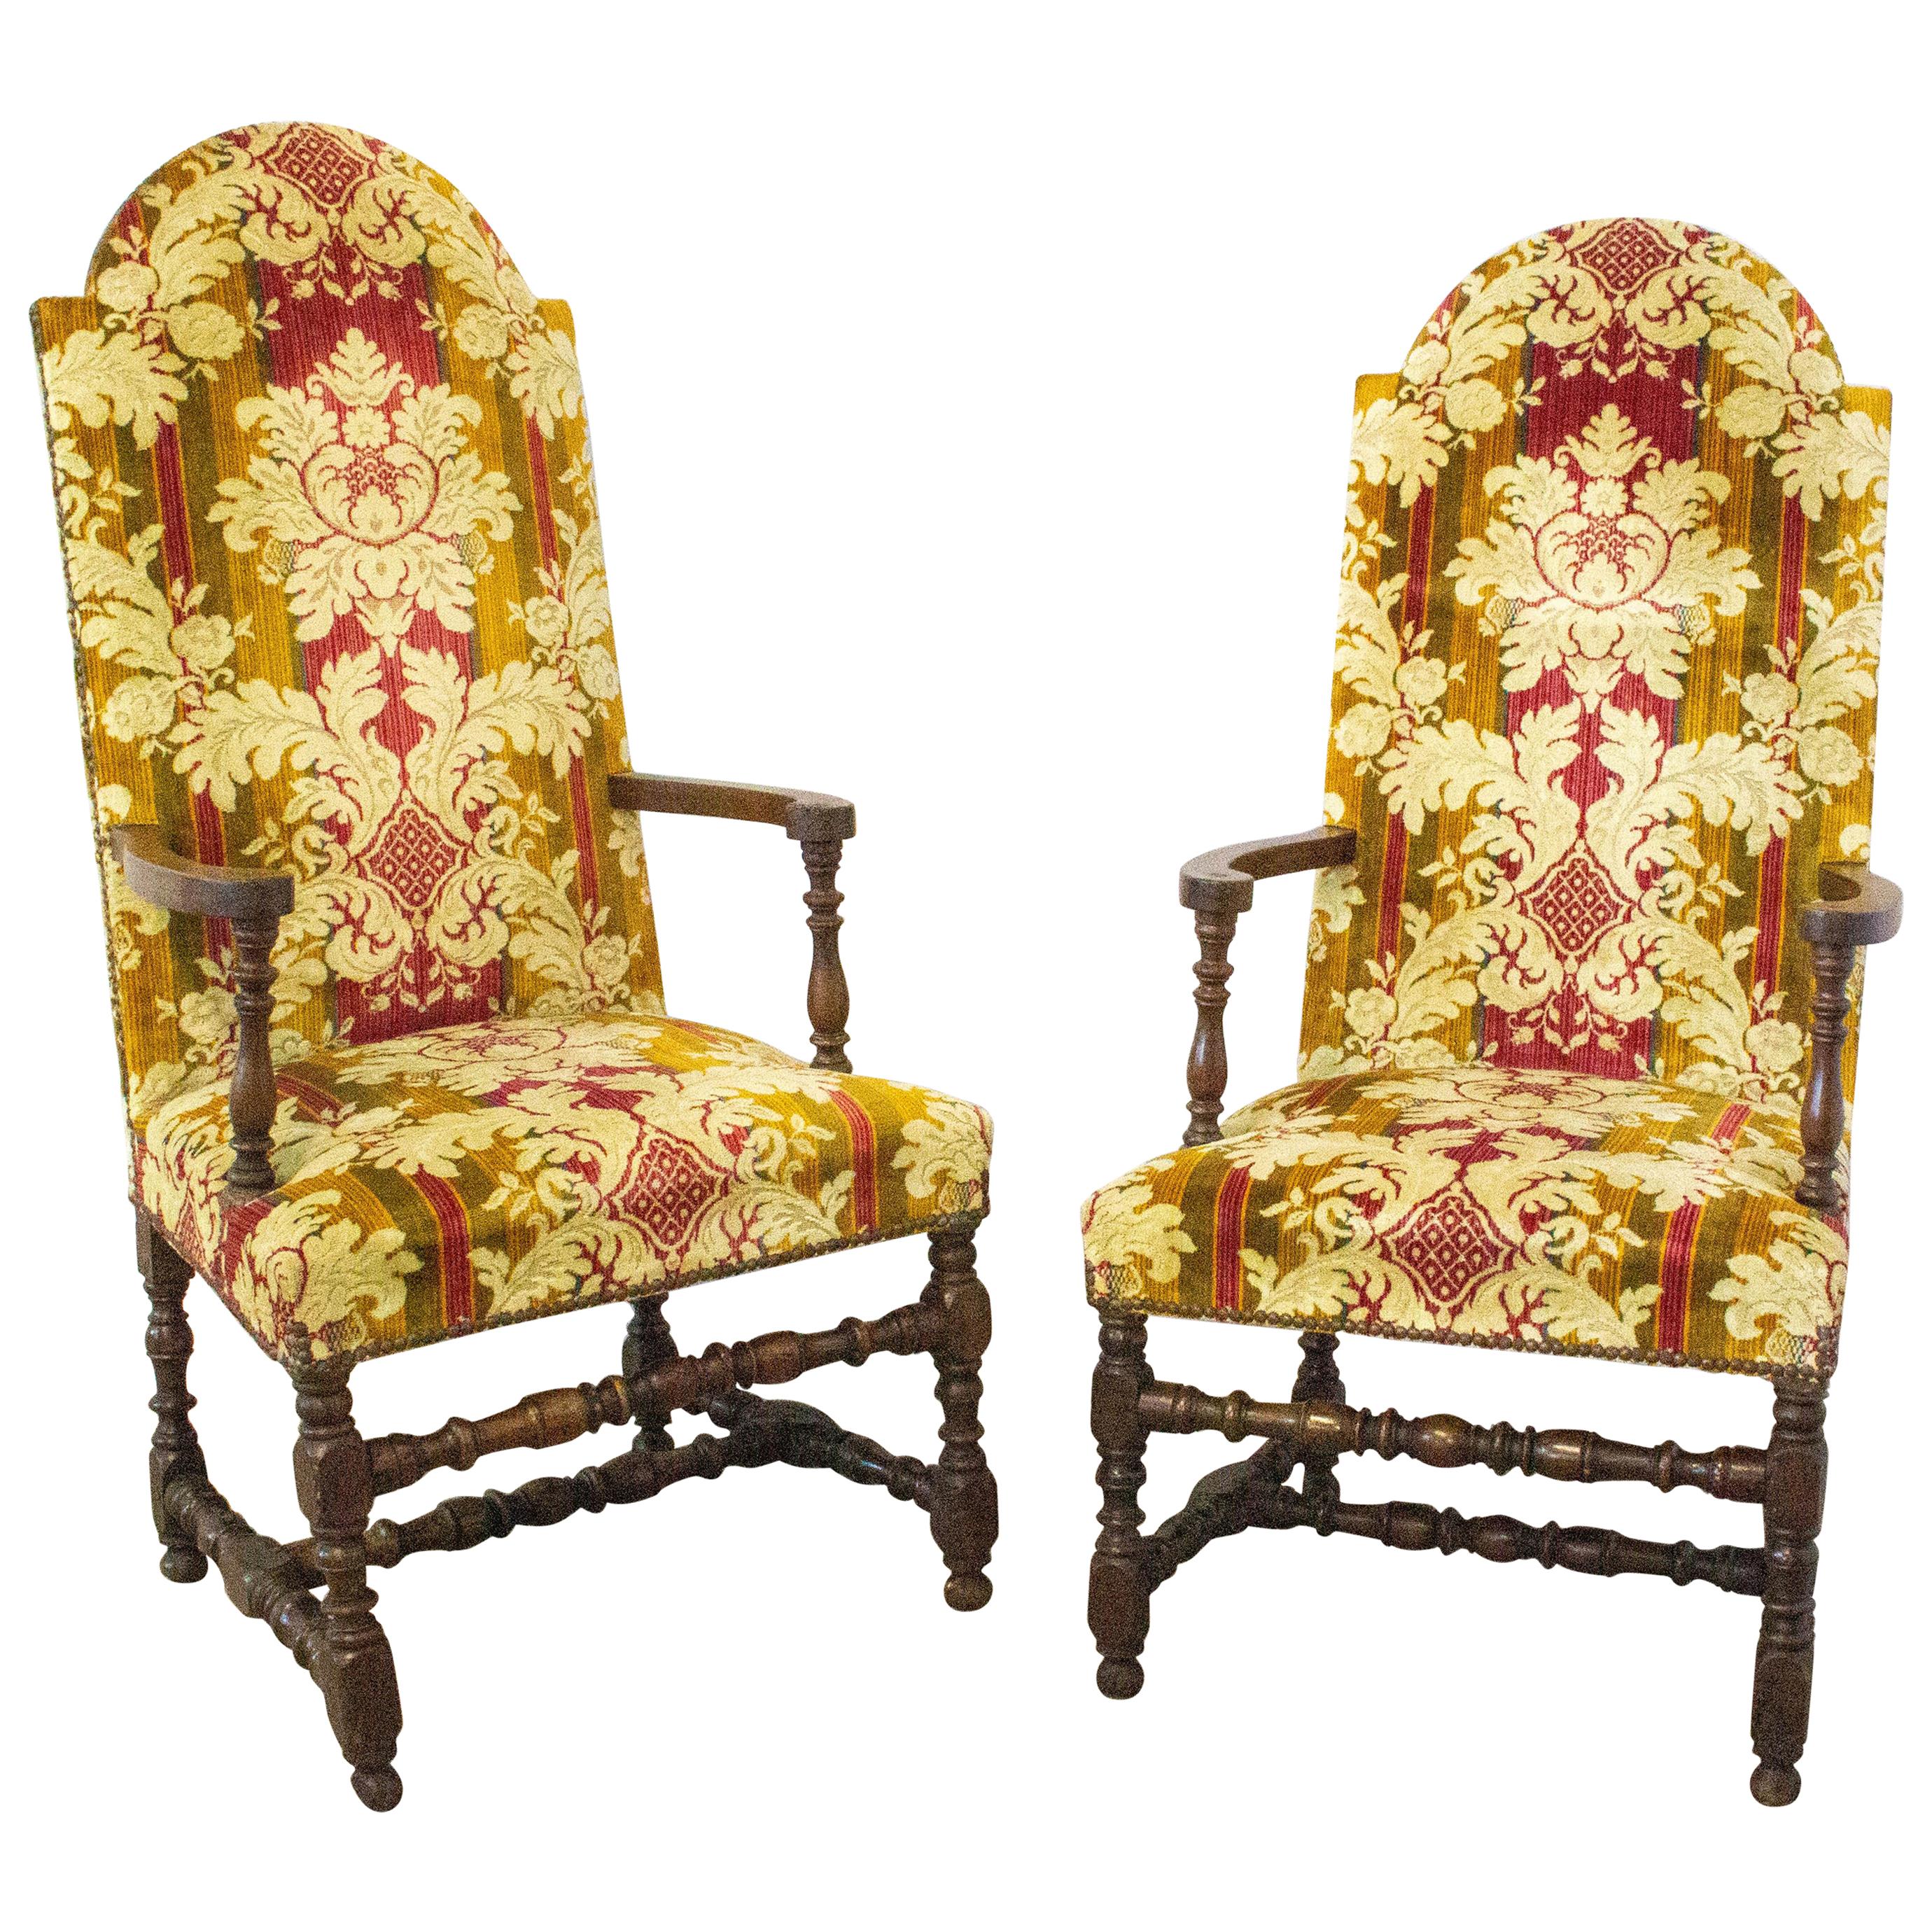 Pair of Chairs Open Armchairs French 18th Century Louis XIII